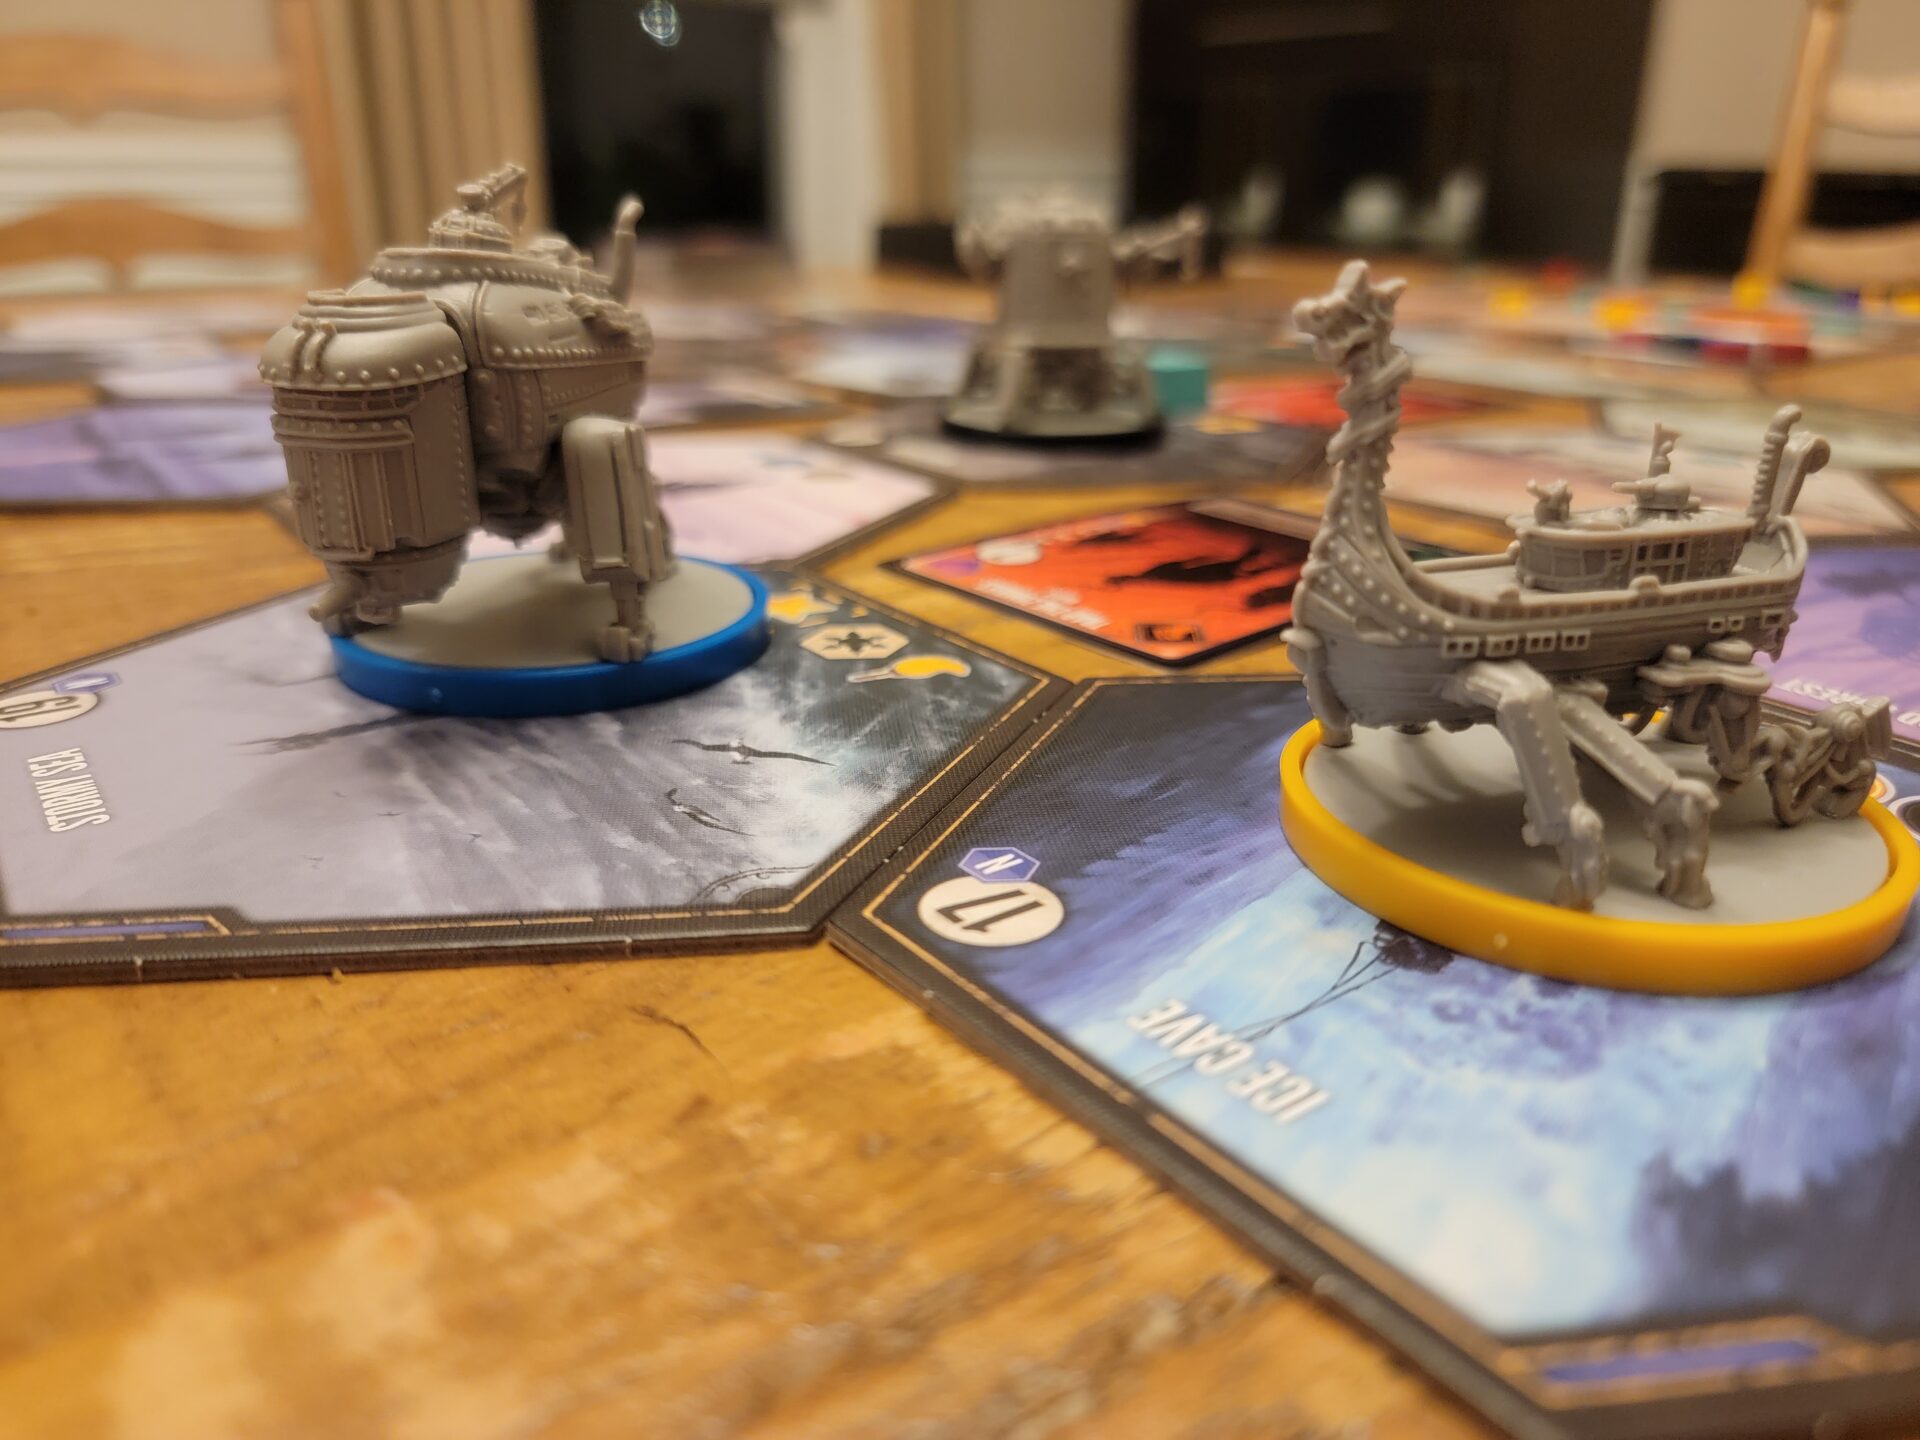 Expeditions board game components while the game is being played.